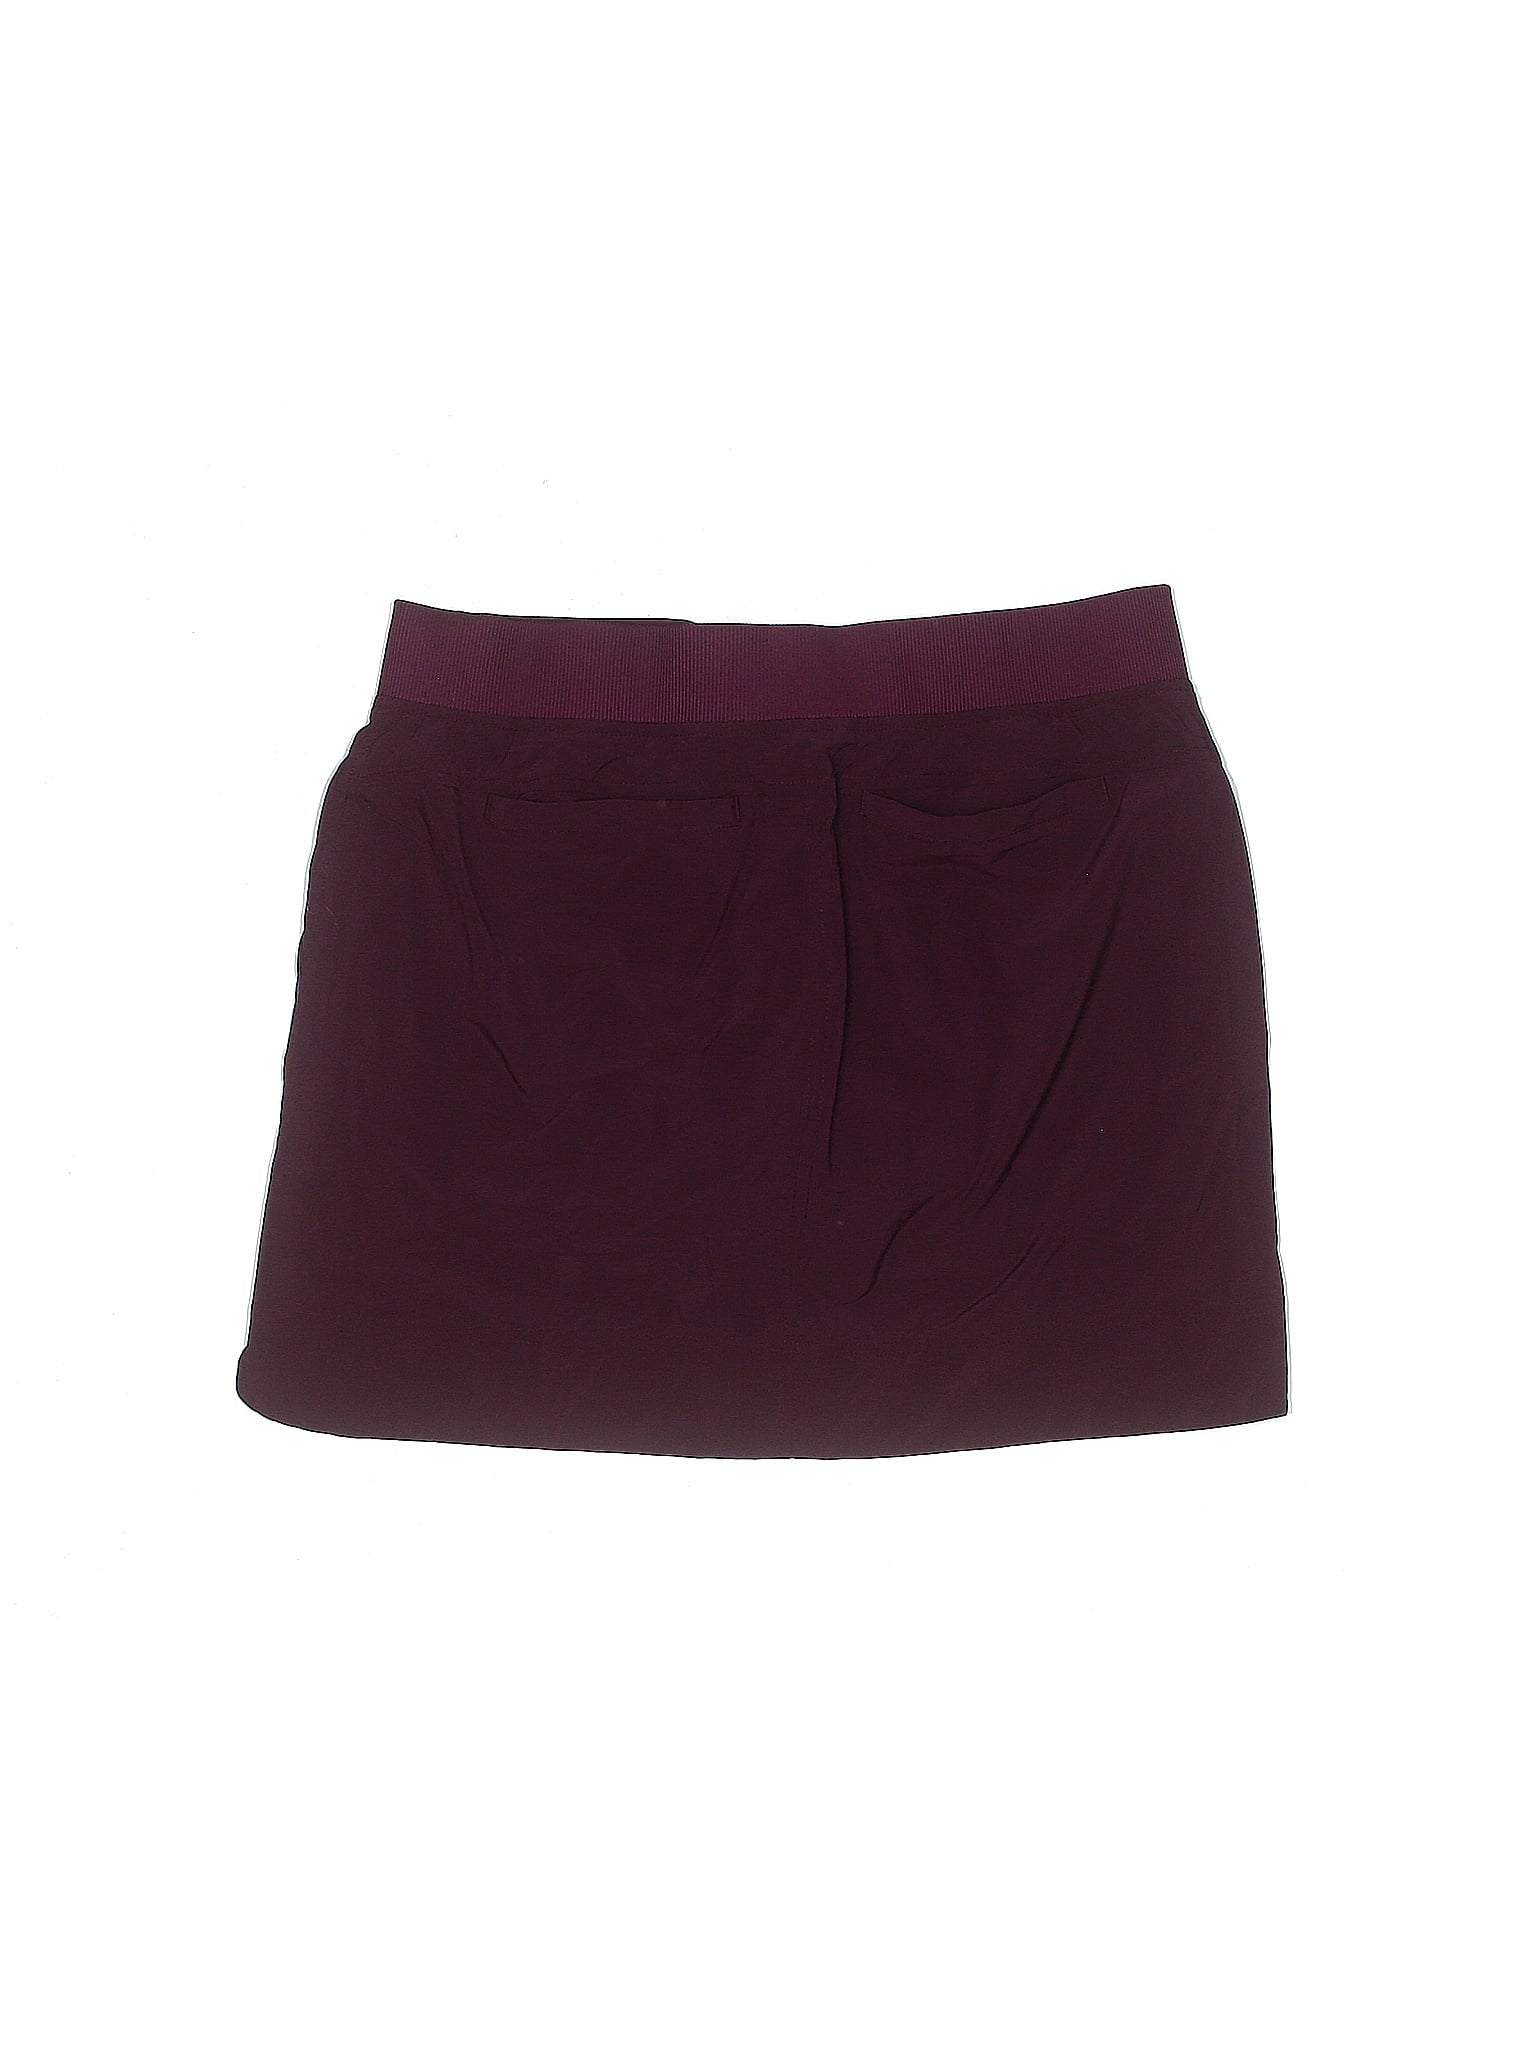 Active Skirt size - 12